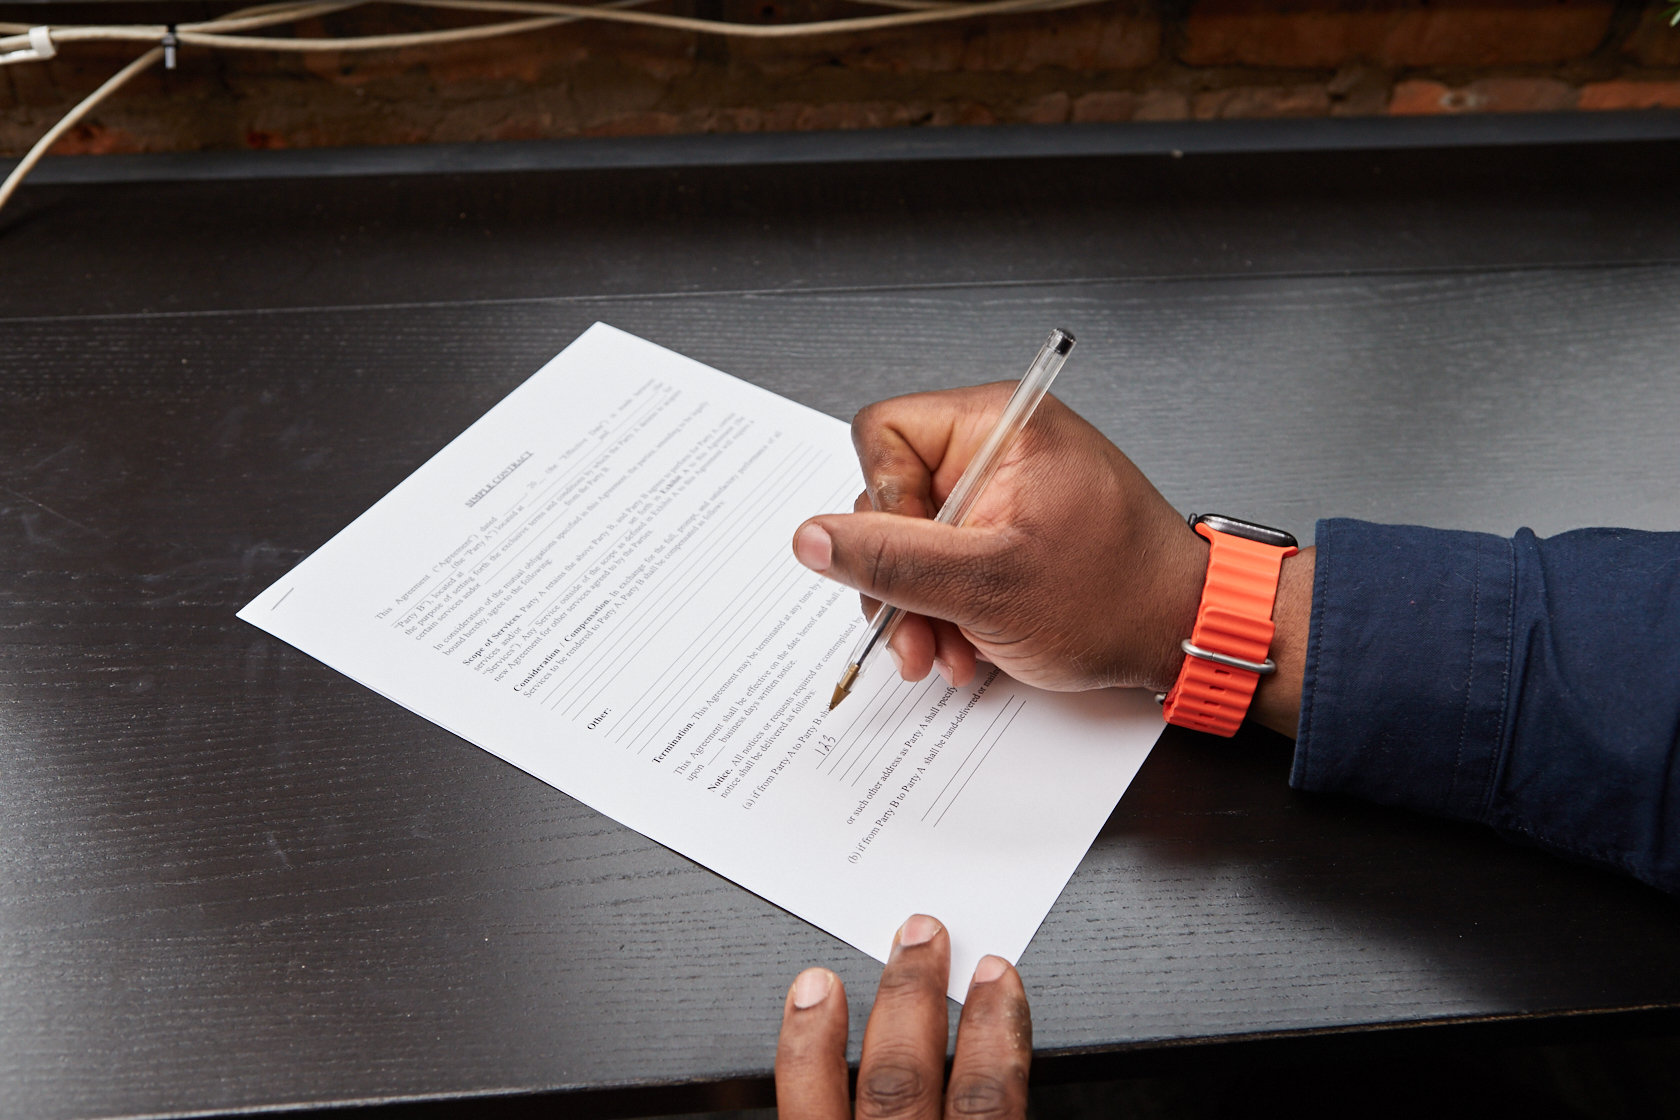 Black person writing answers to questions on a piece of paper. Focus on hand.